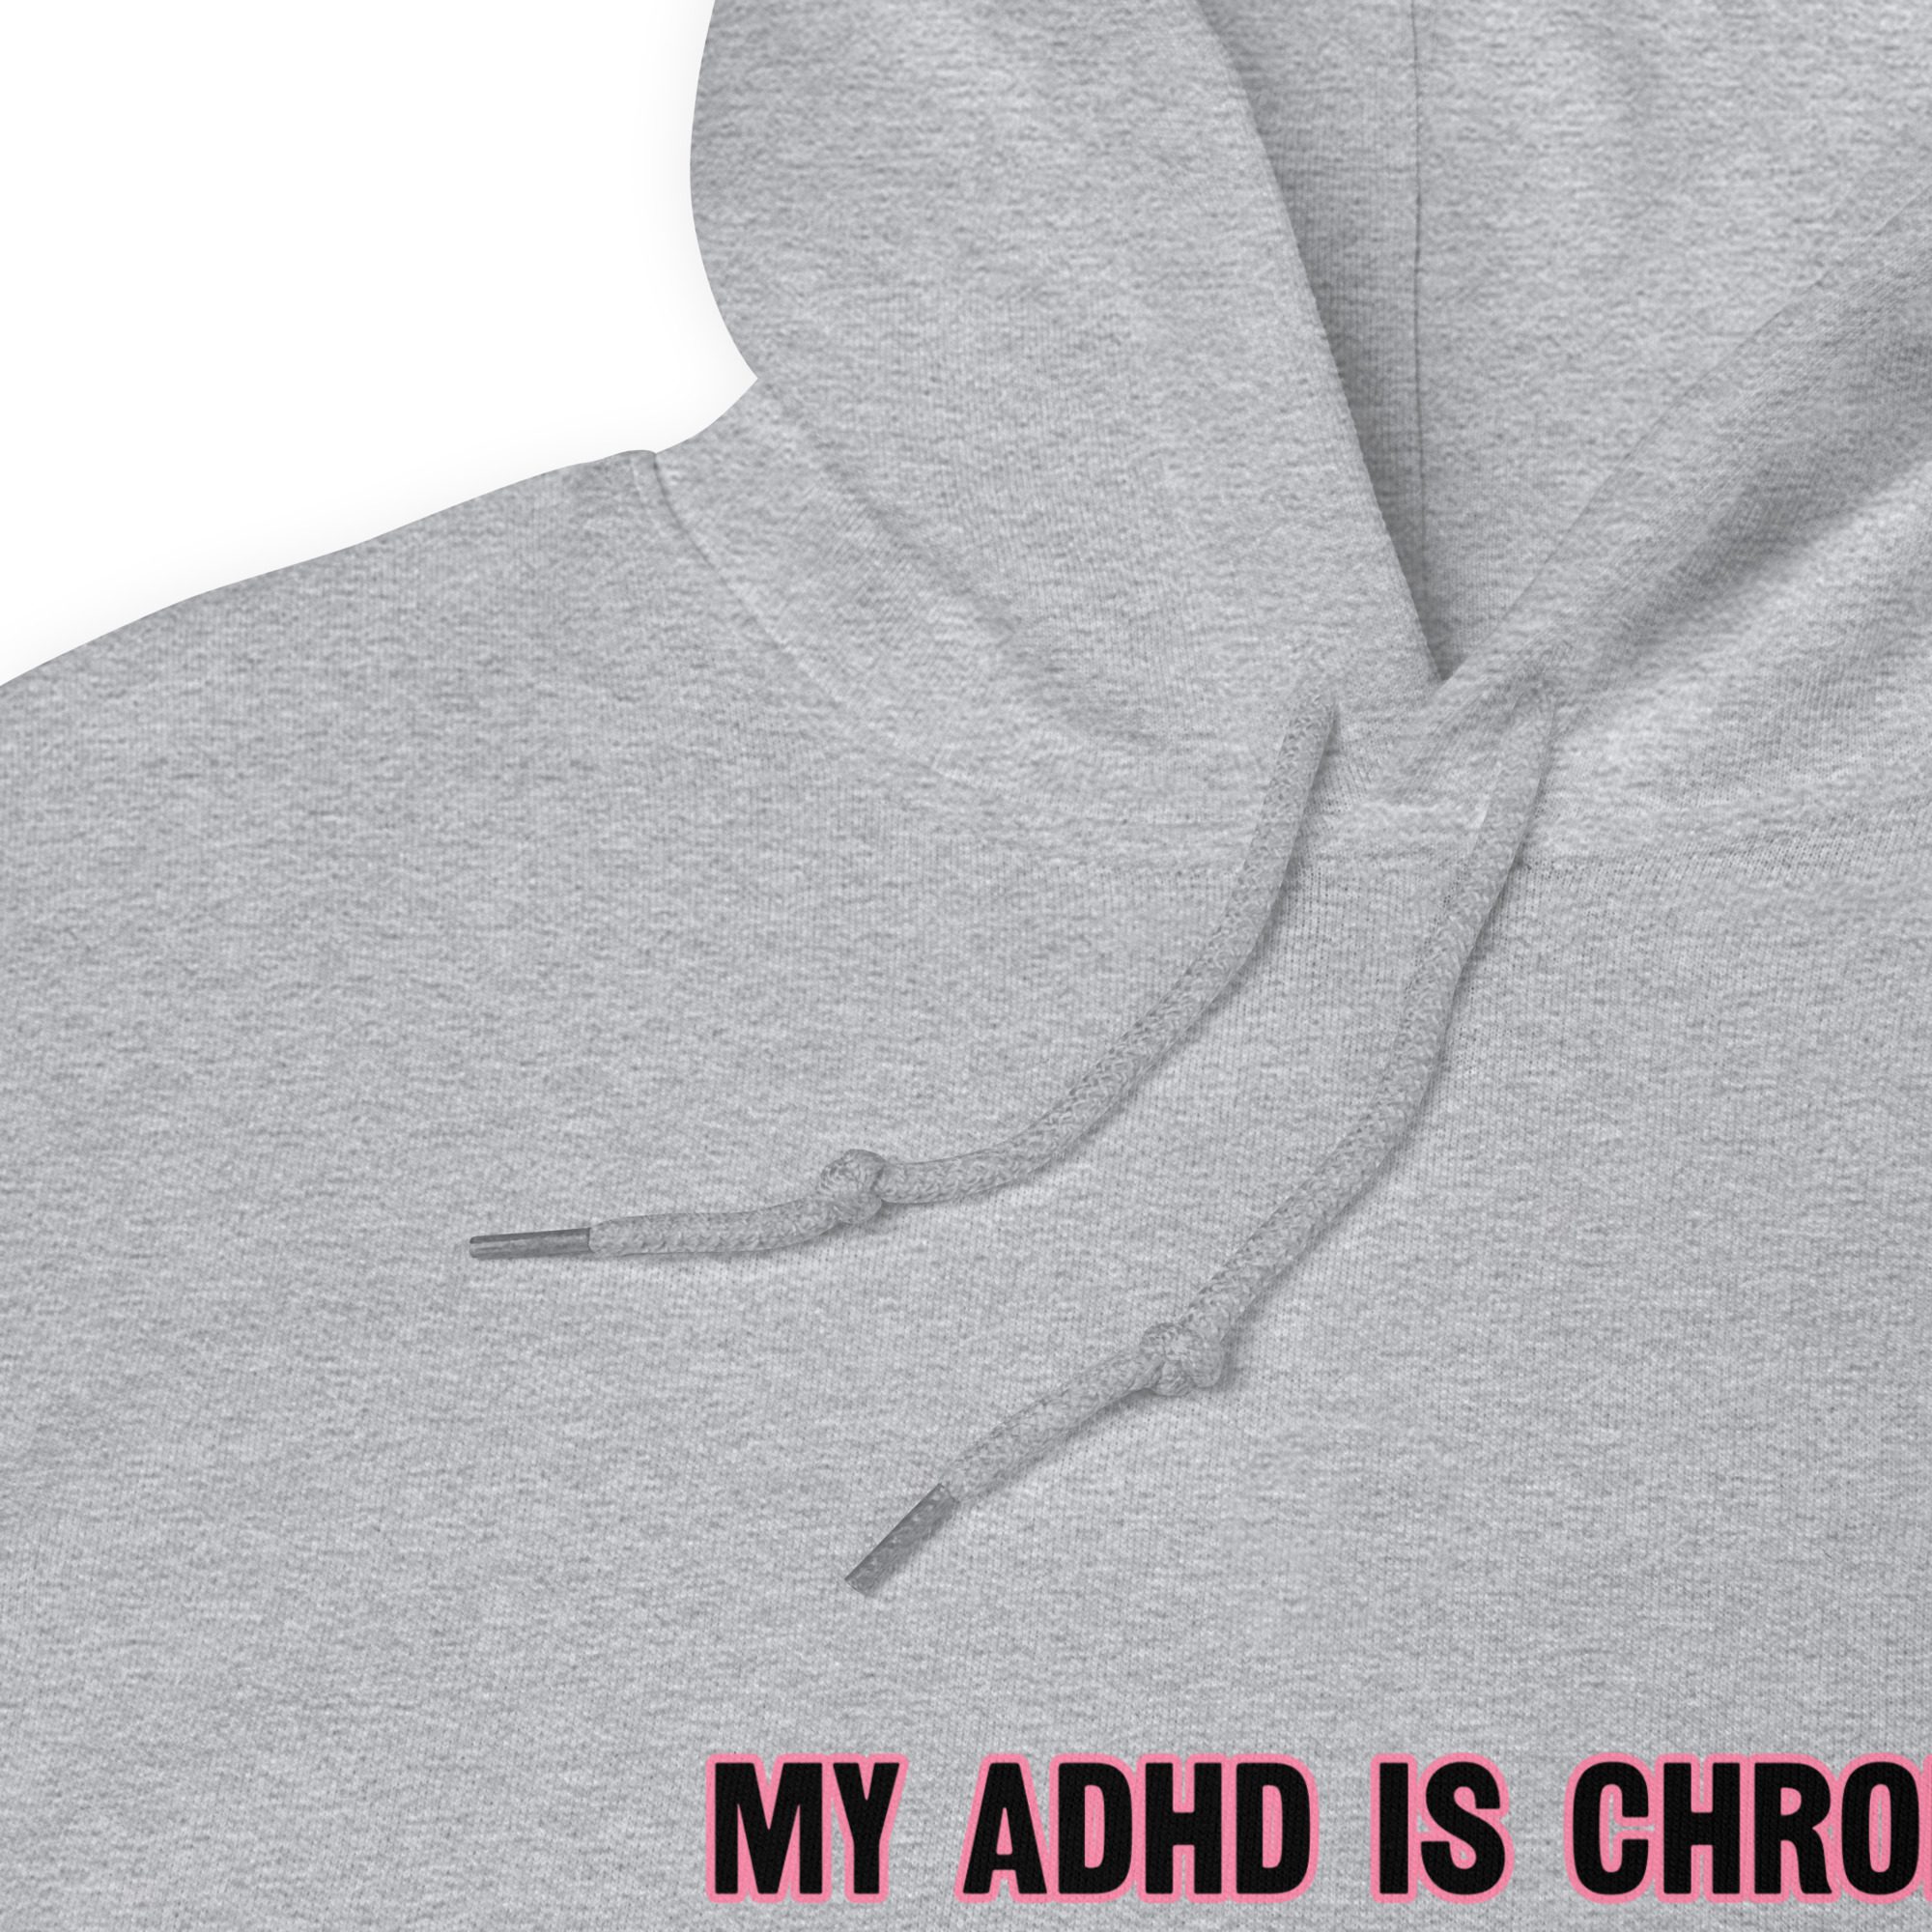 My ADHD Is Chronic But This Ass Is Iconic Unisex Hoodie